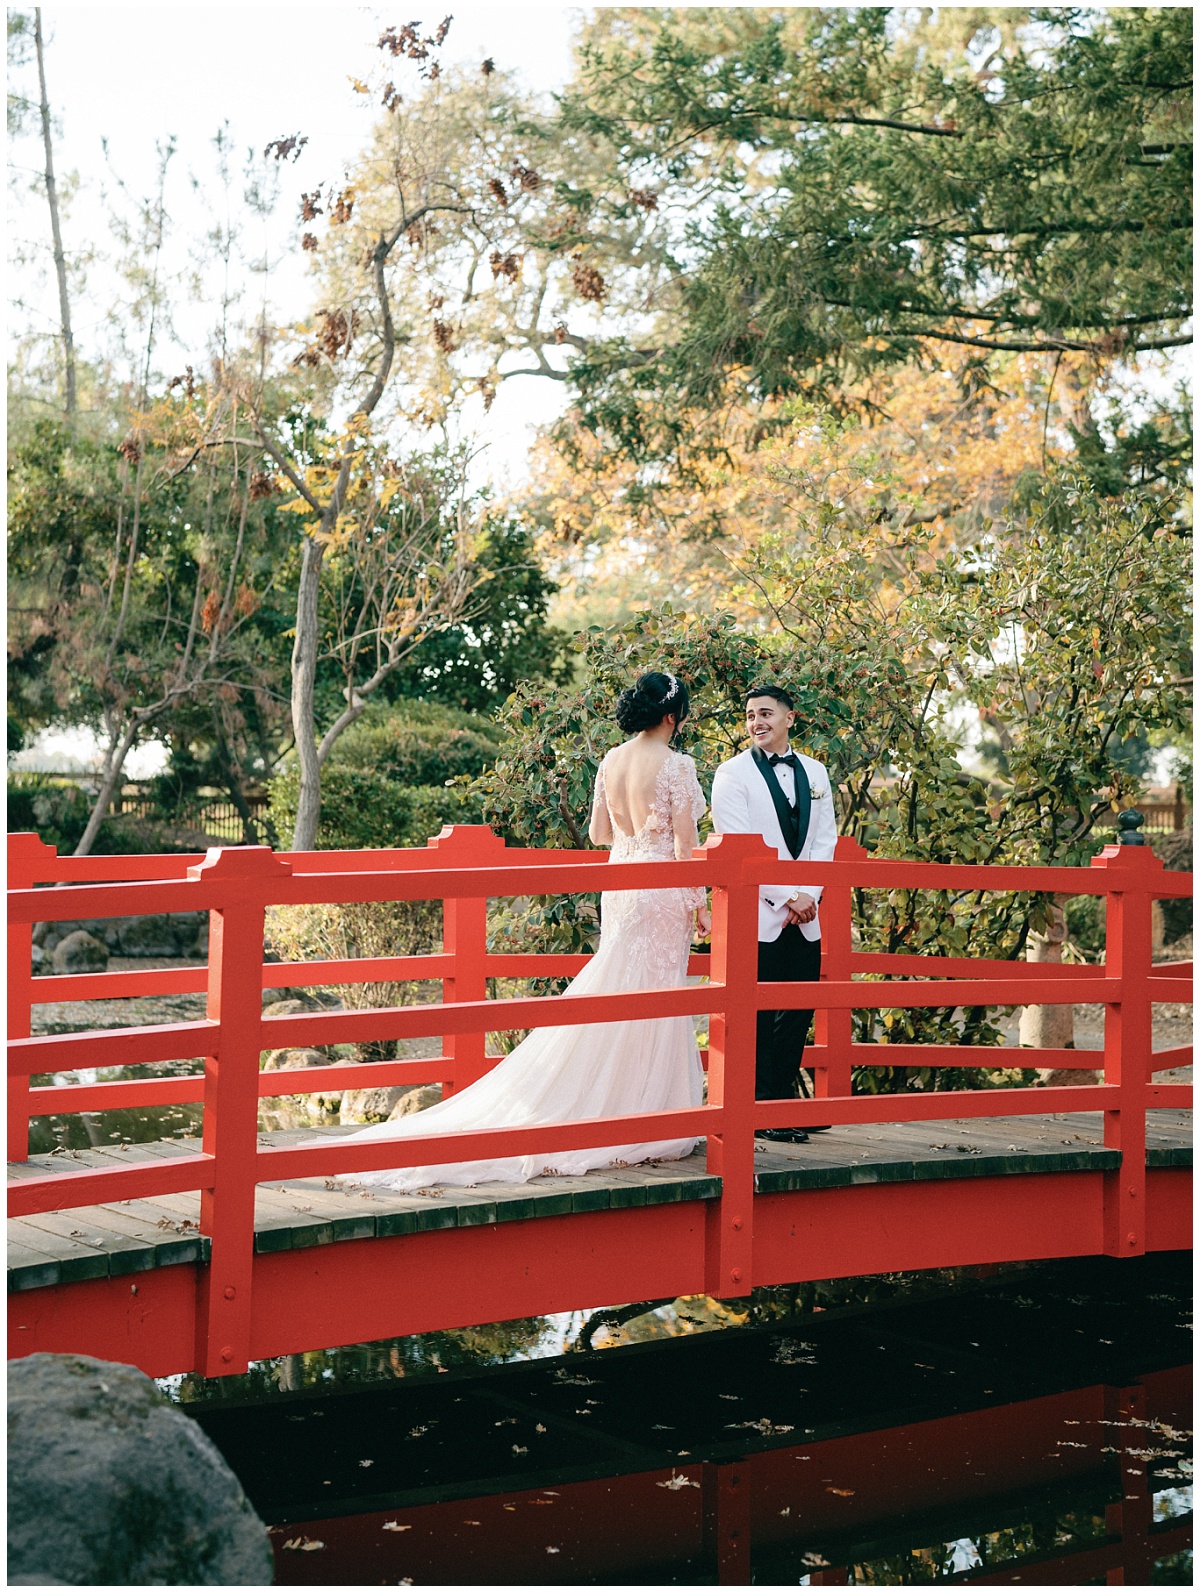 A First Look along a Japanese Style Red Bridge